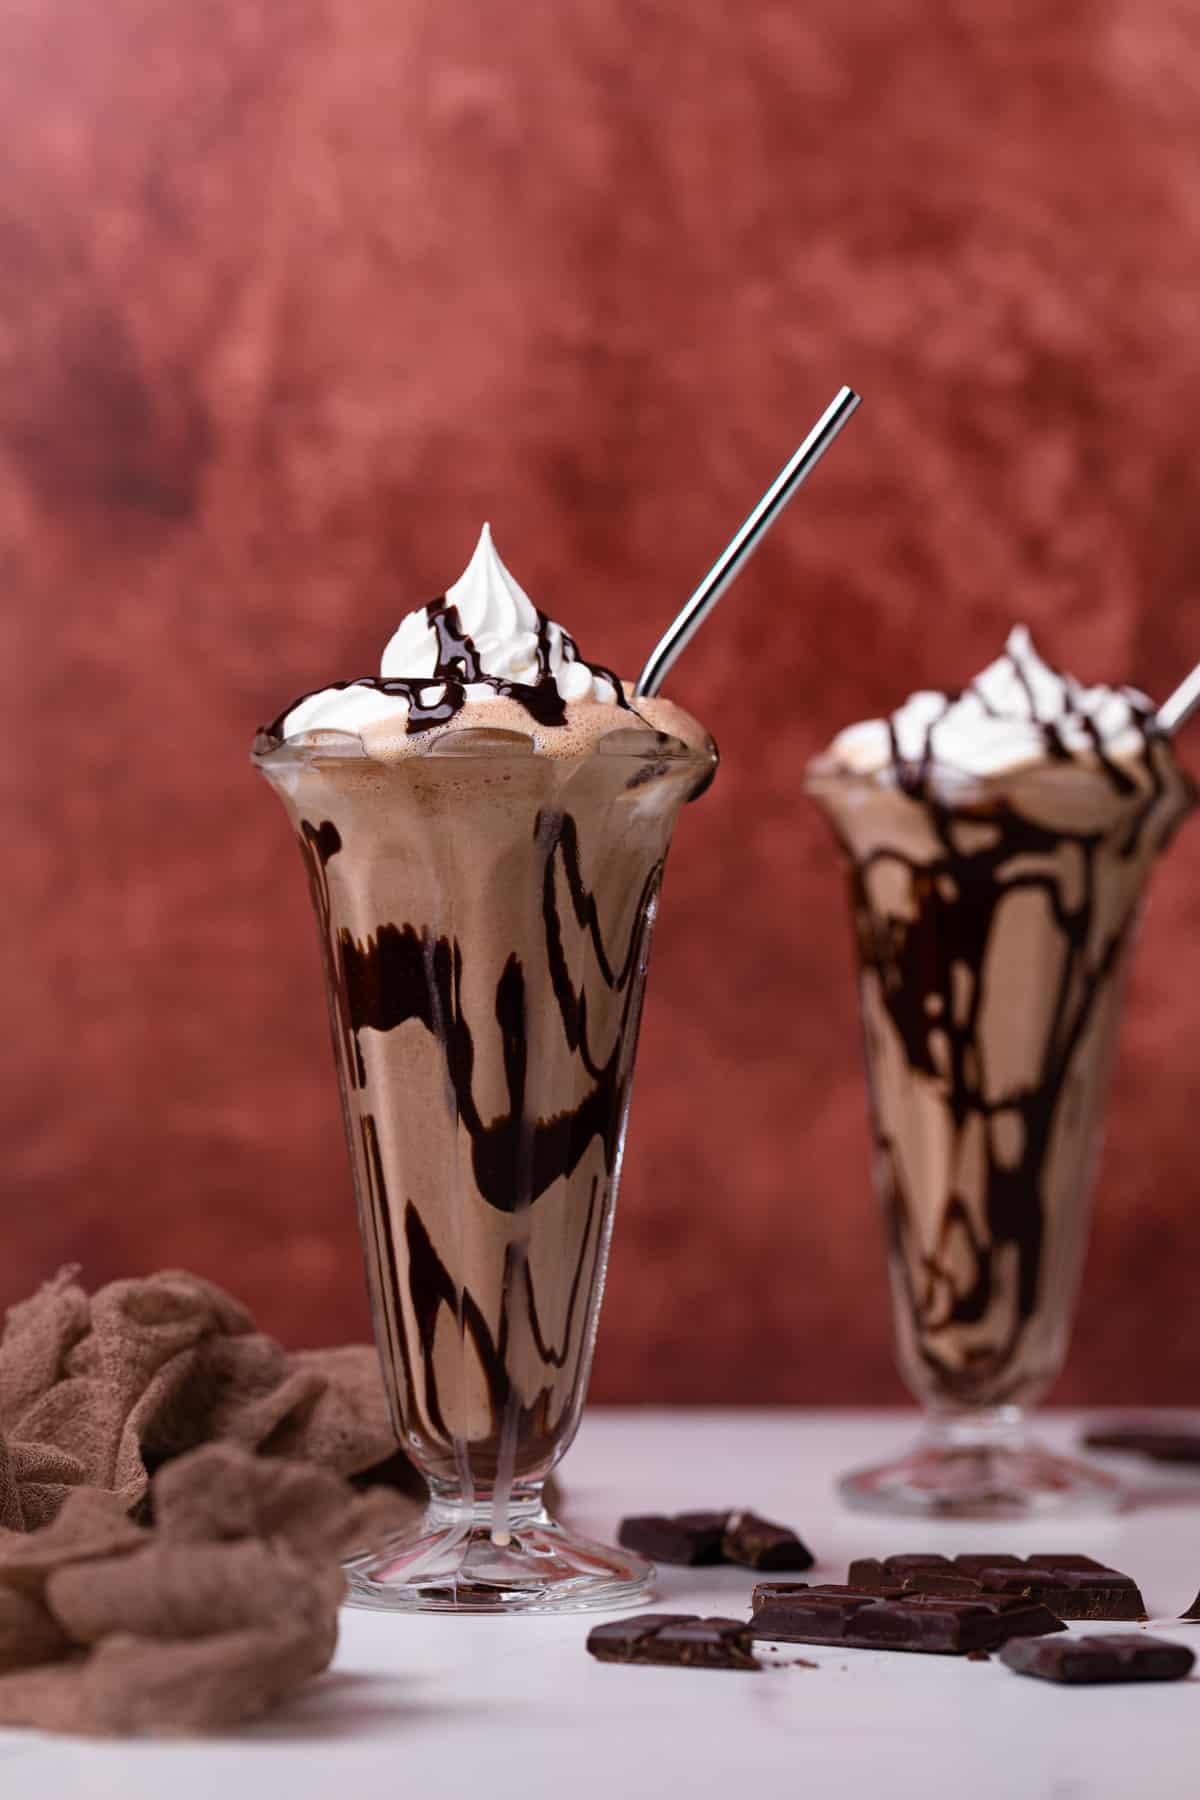 Two Dairy-Free Peanut Butter Chocolate Milkshakes in tall glasses with metal straws.